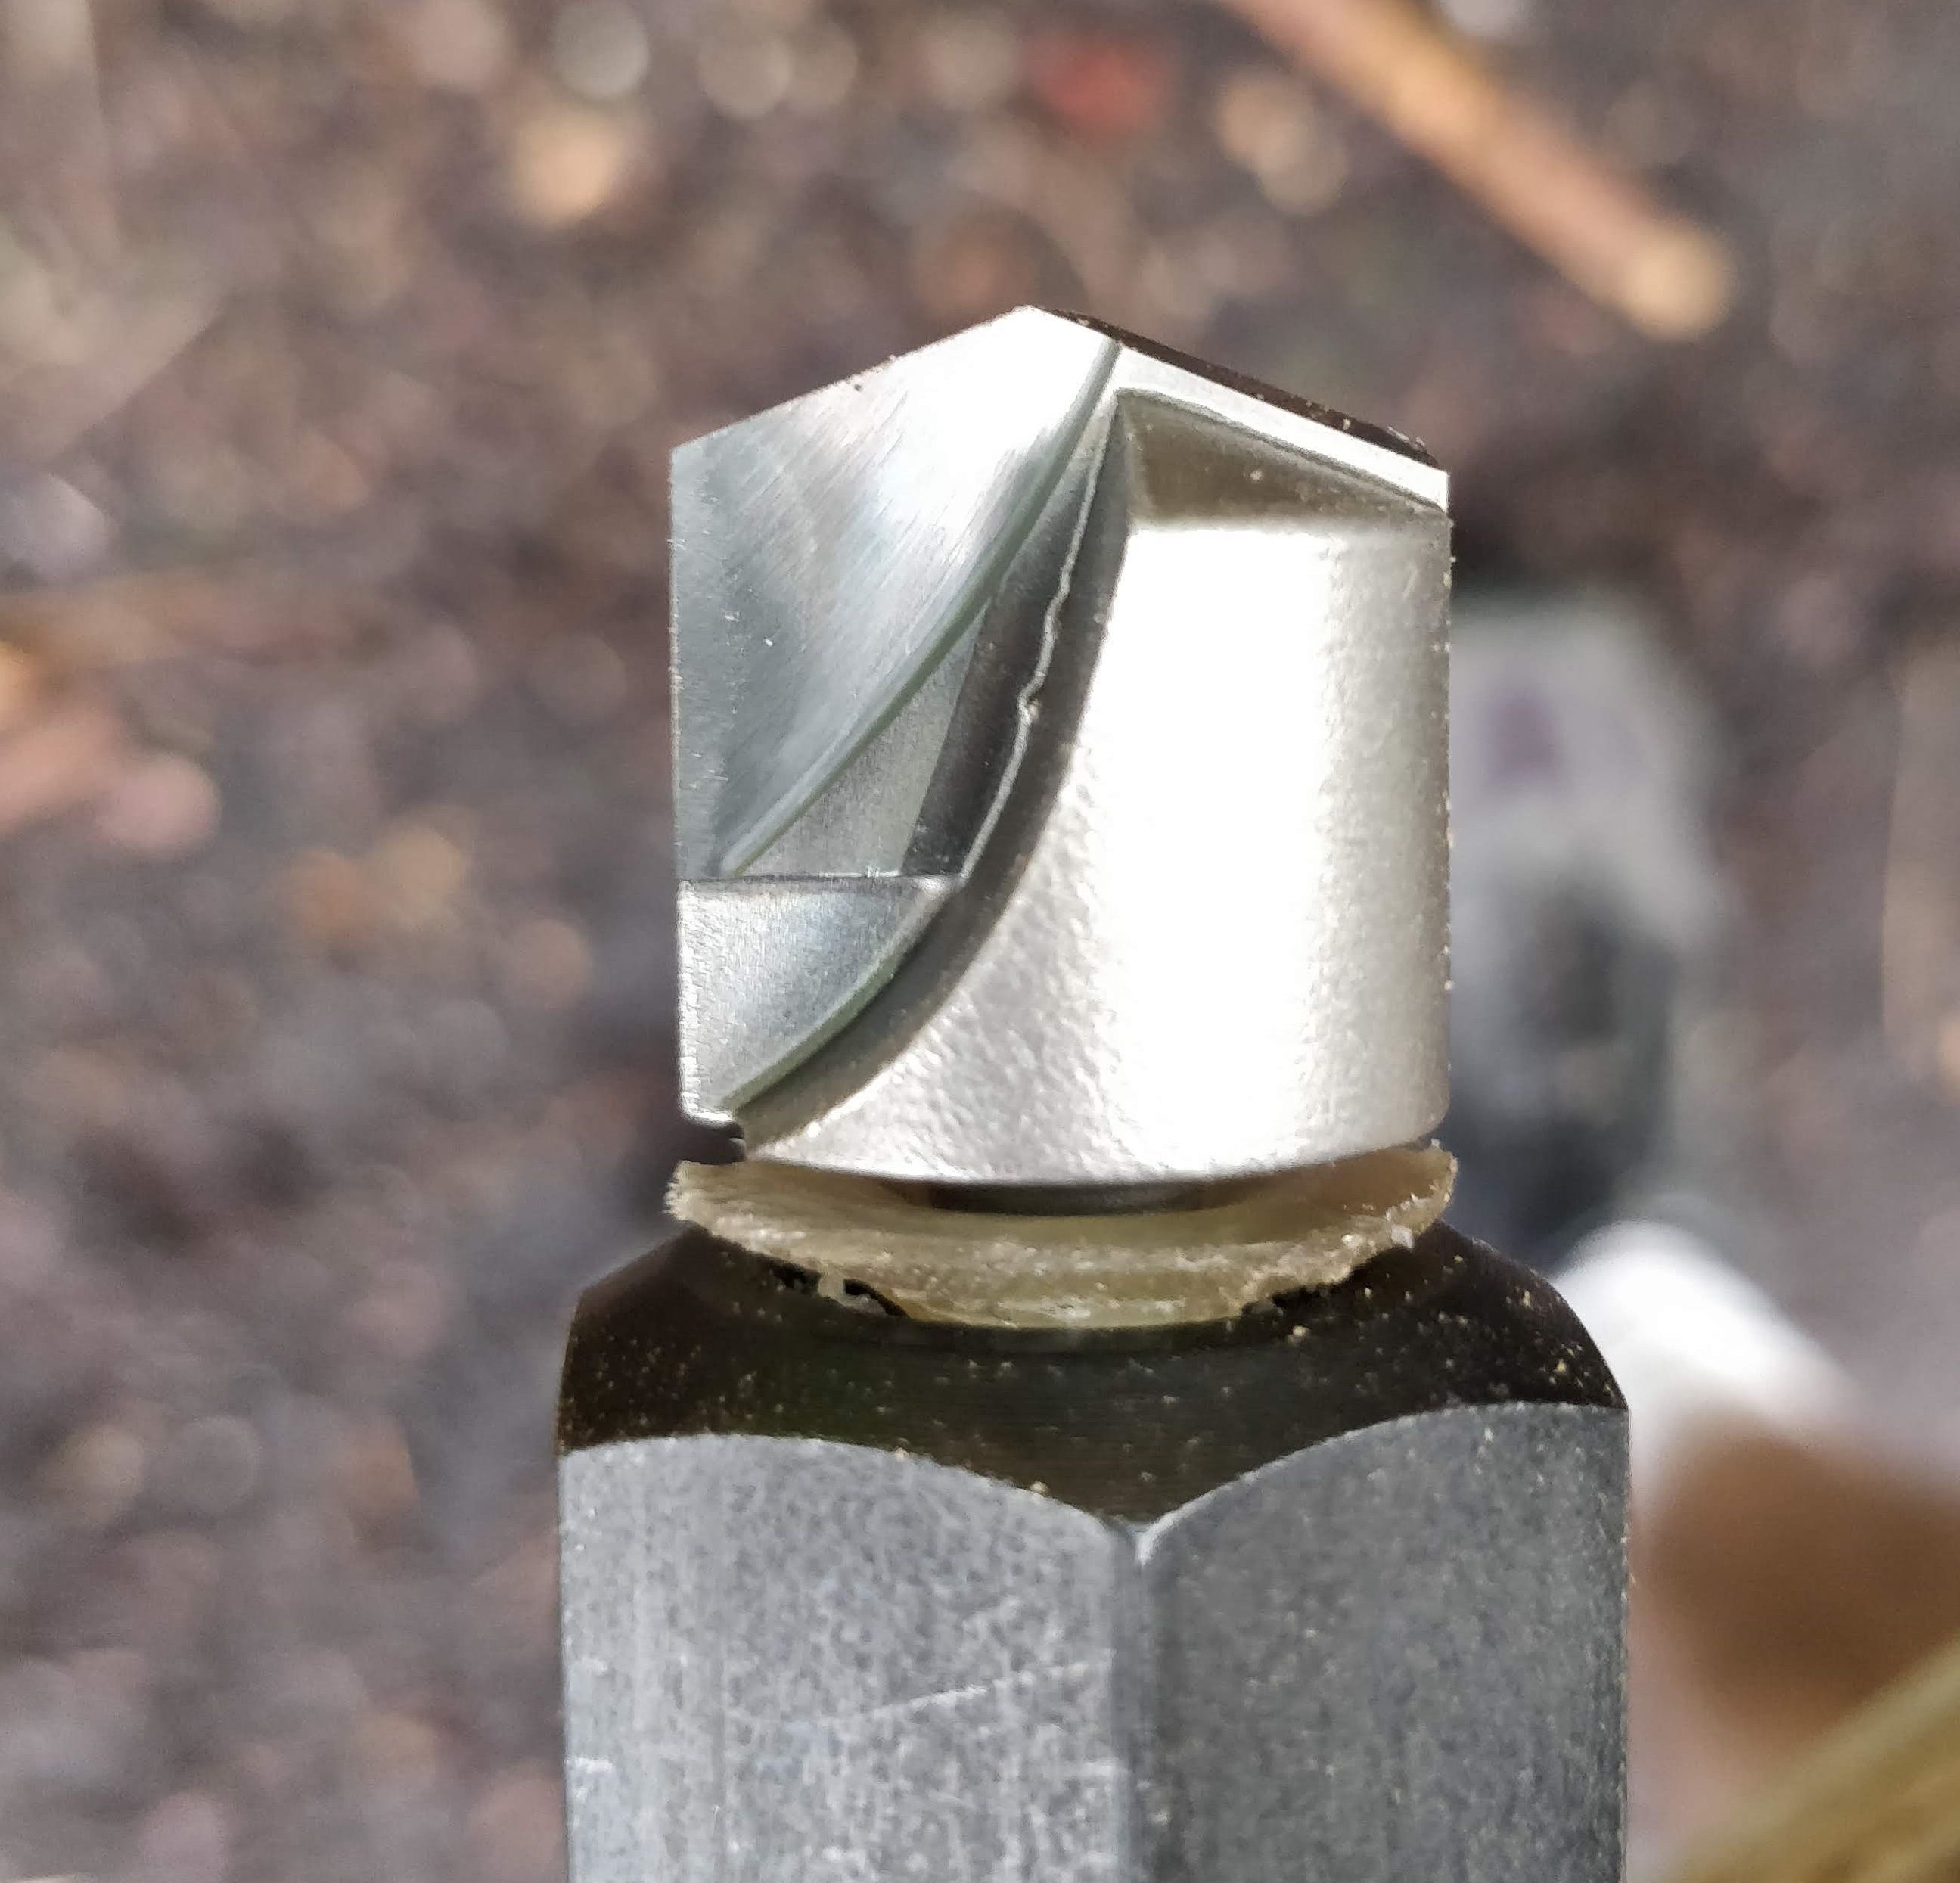 Specialized router bit